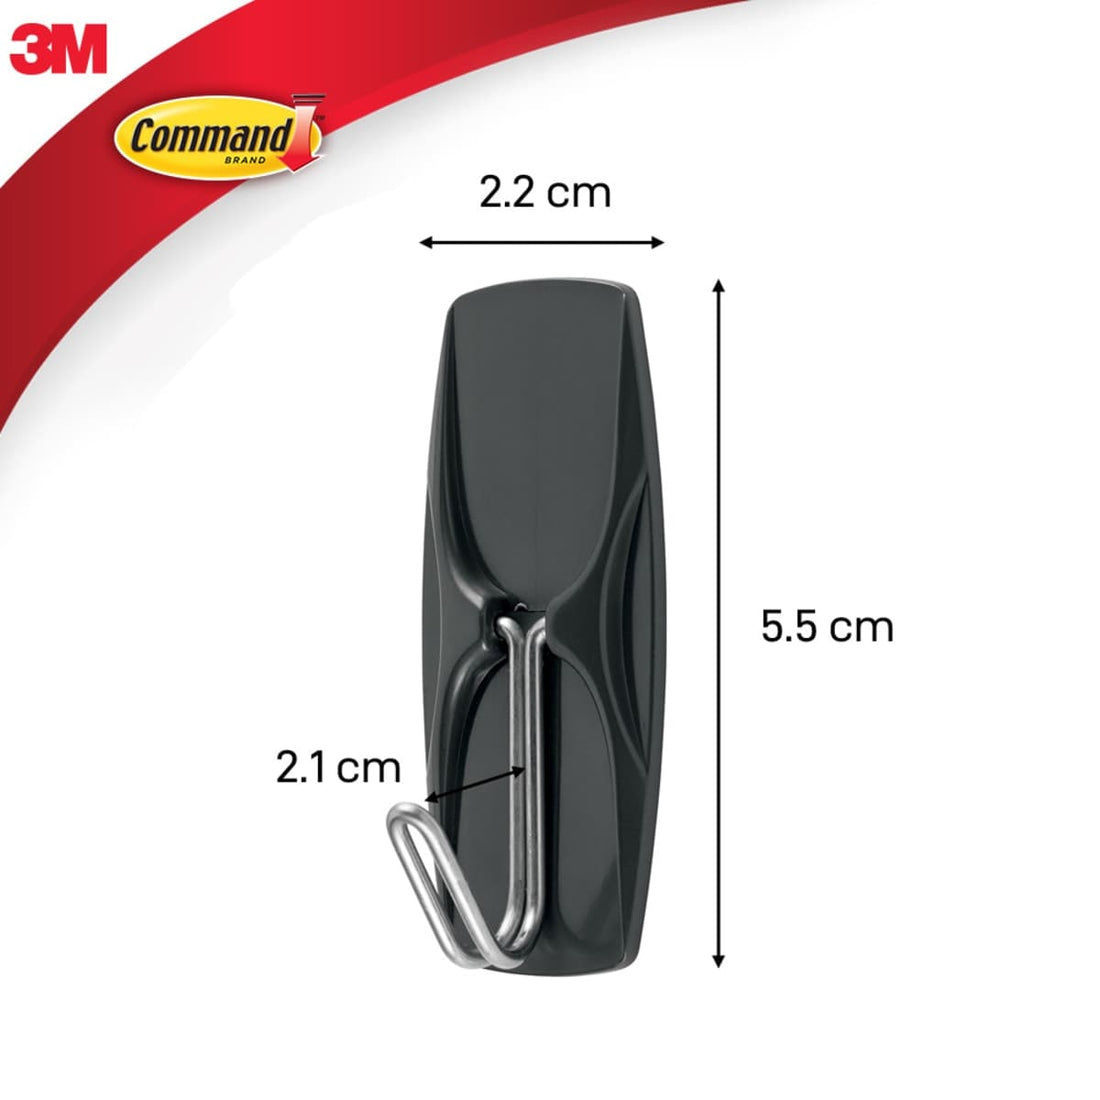 2 BLACK ADHESIVE HOOKS FOR OUTDOOR USE WITH STEEL TIPS COMMAND - best price from Maltashopper.com BR410007411